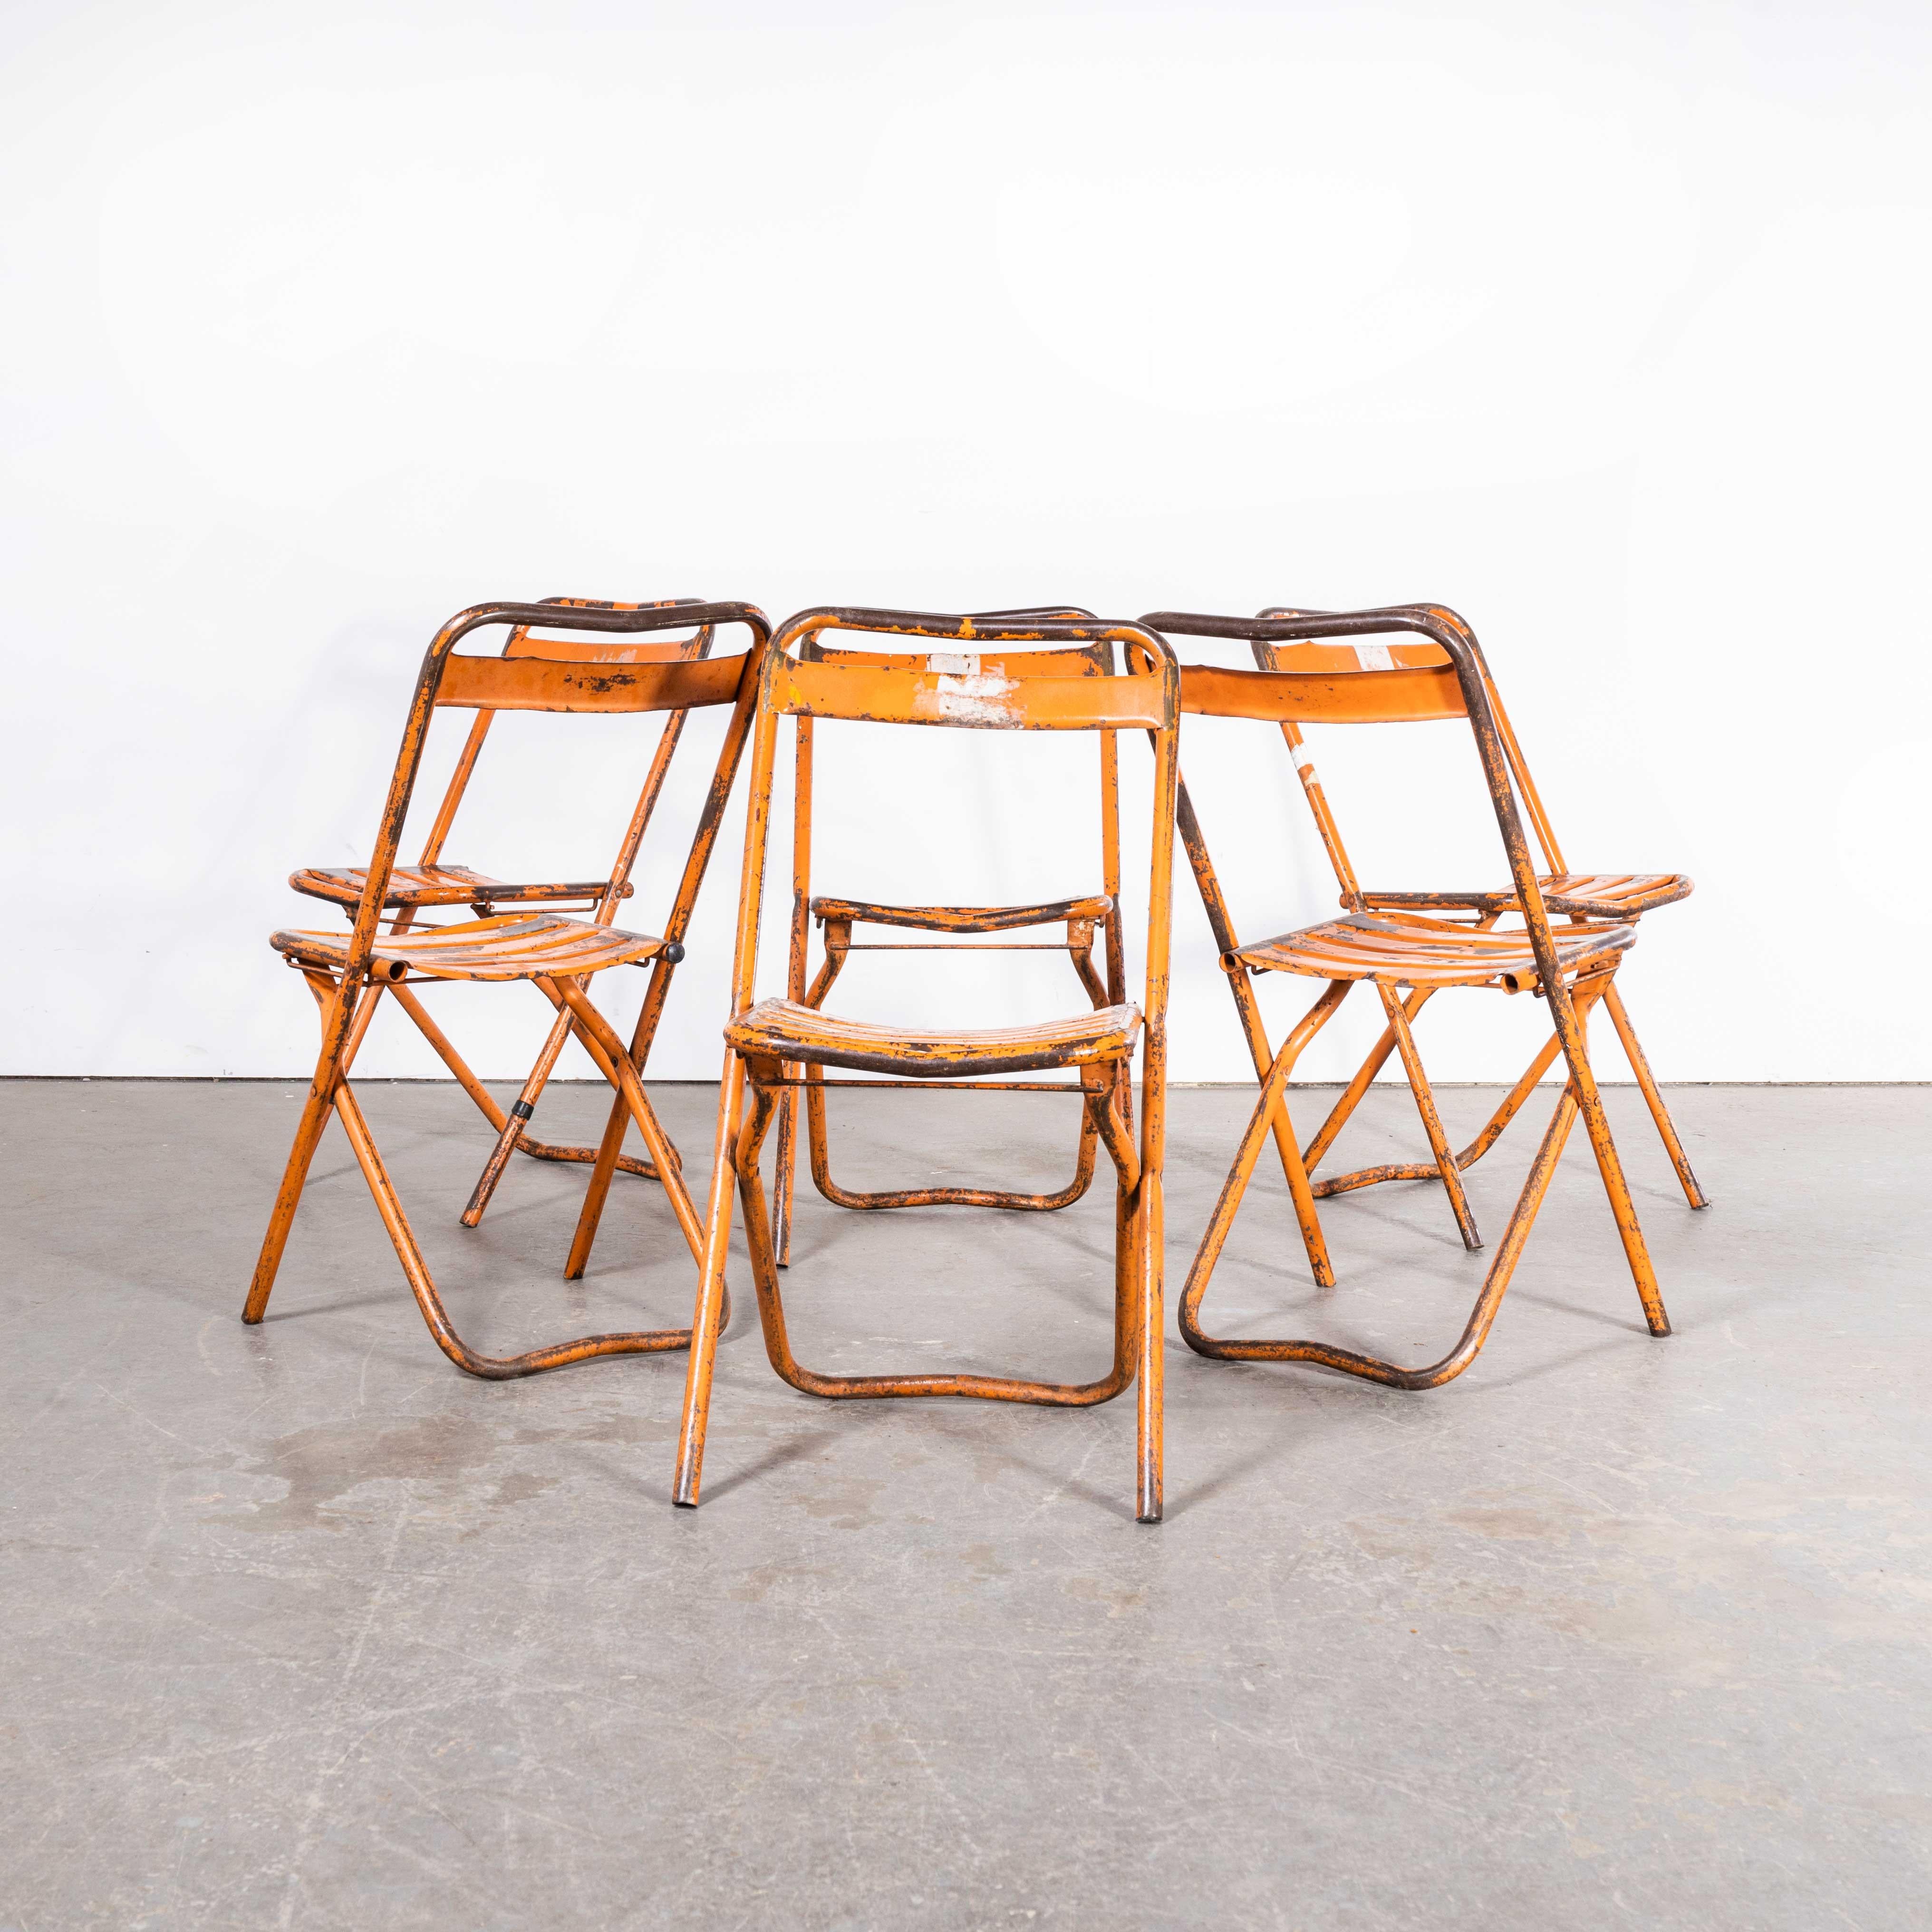 French 1950's Original Orange Tolix Folding Metal Outdoor Chairs - Set Of Six For Sale